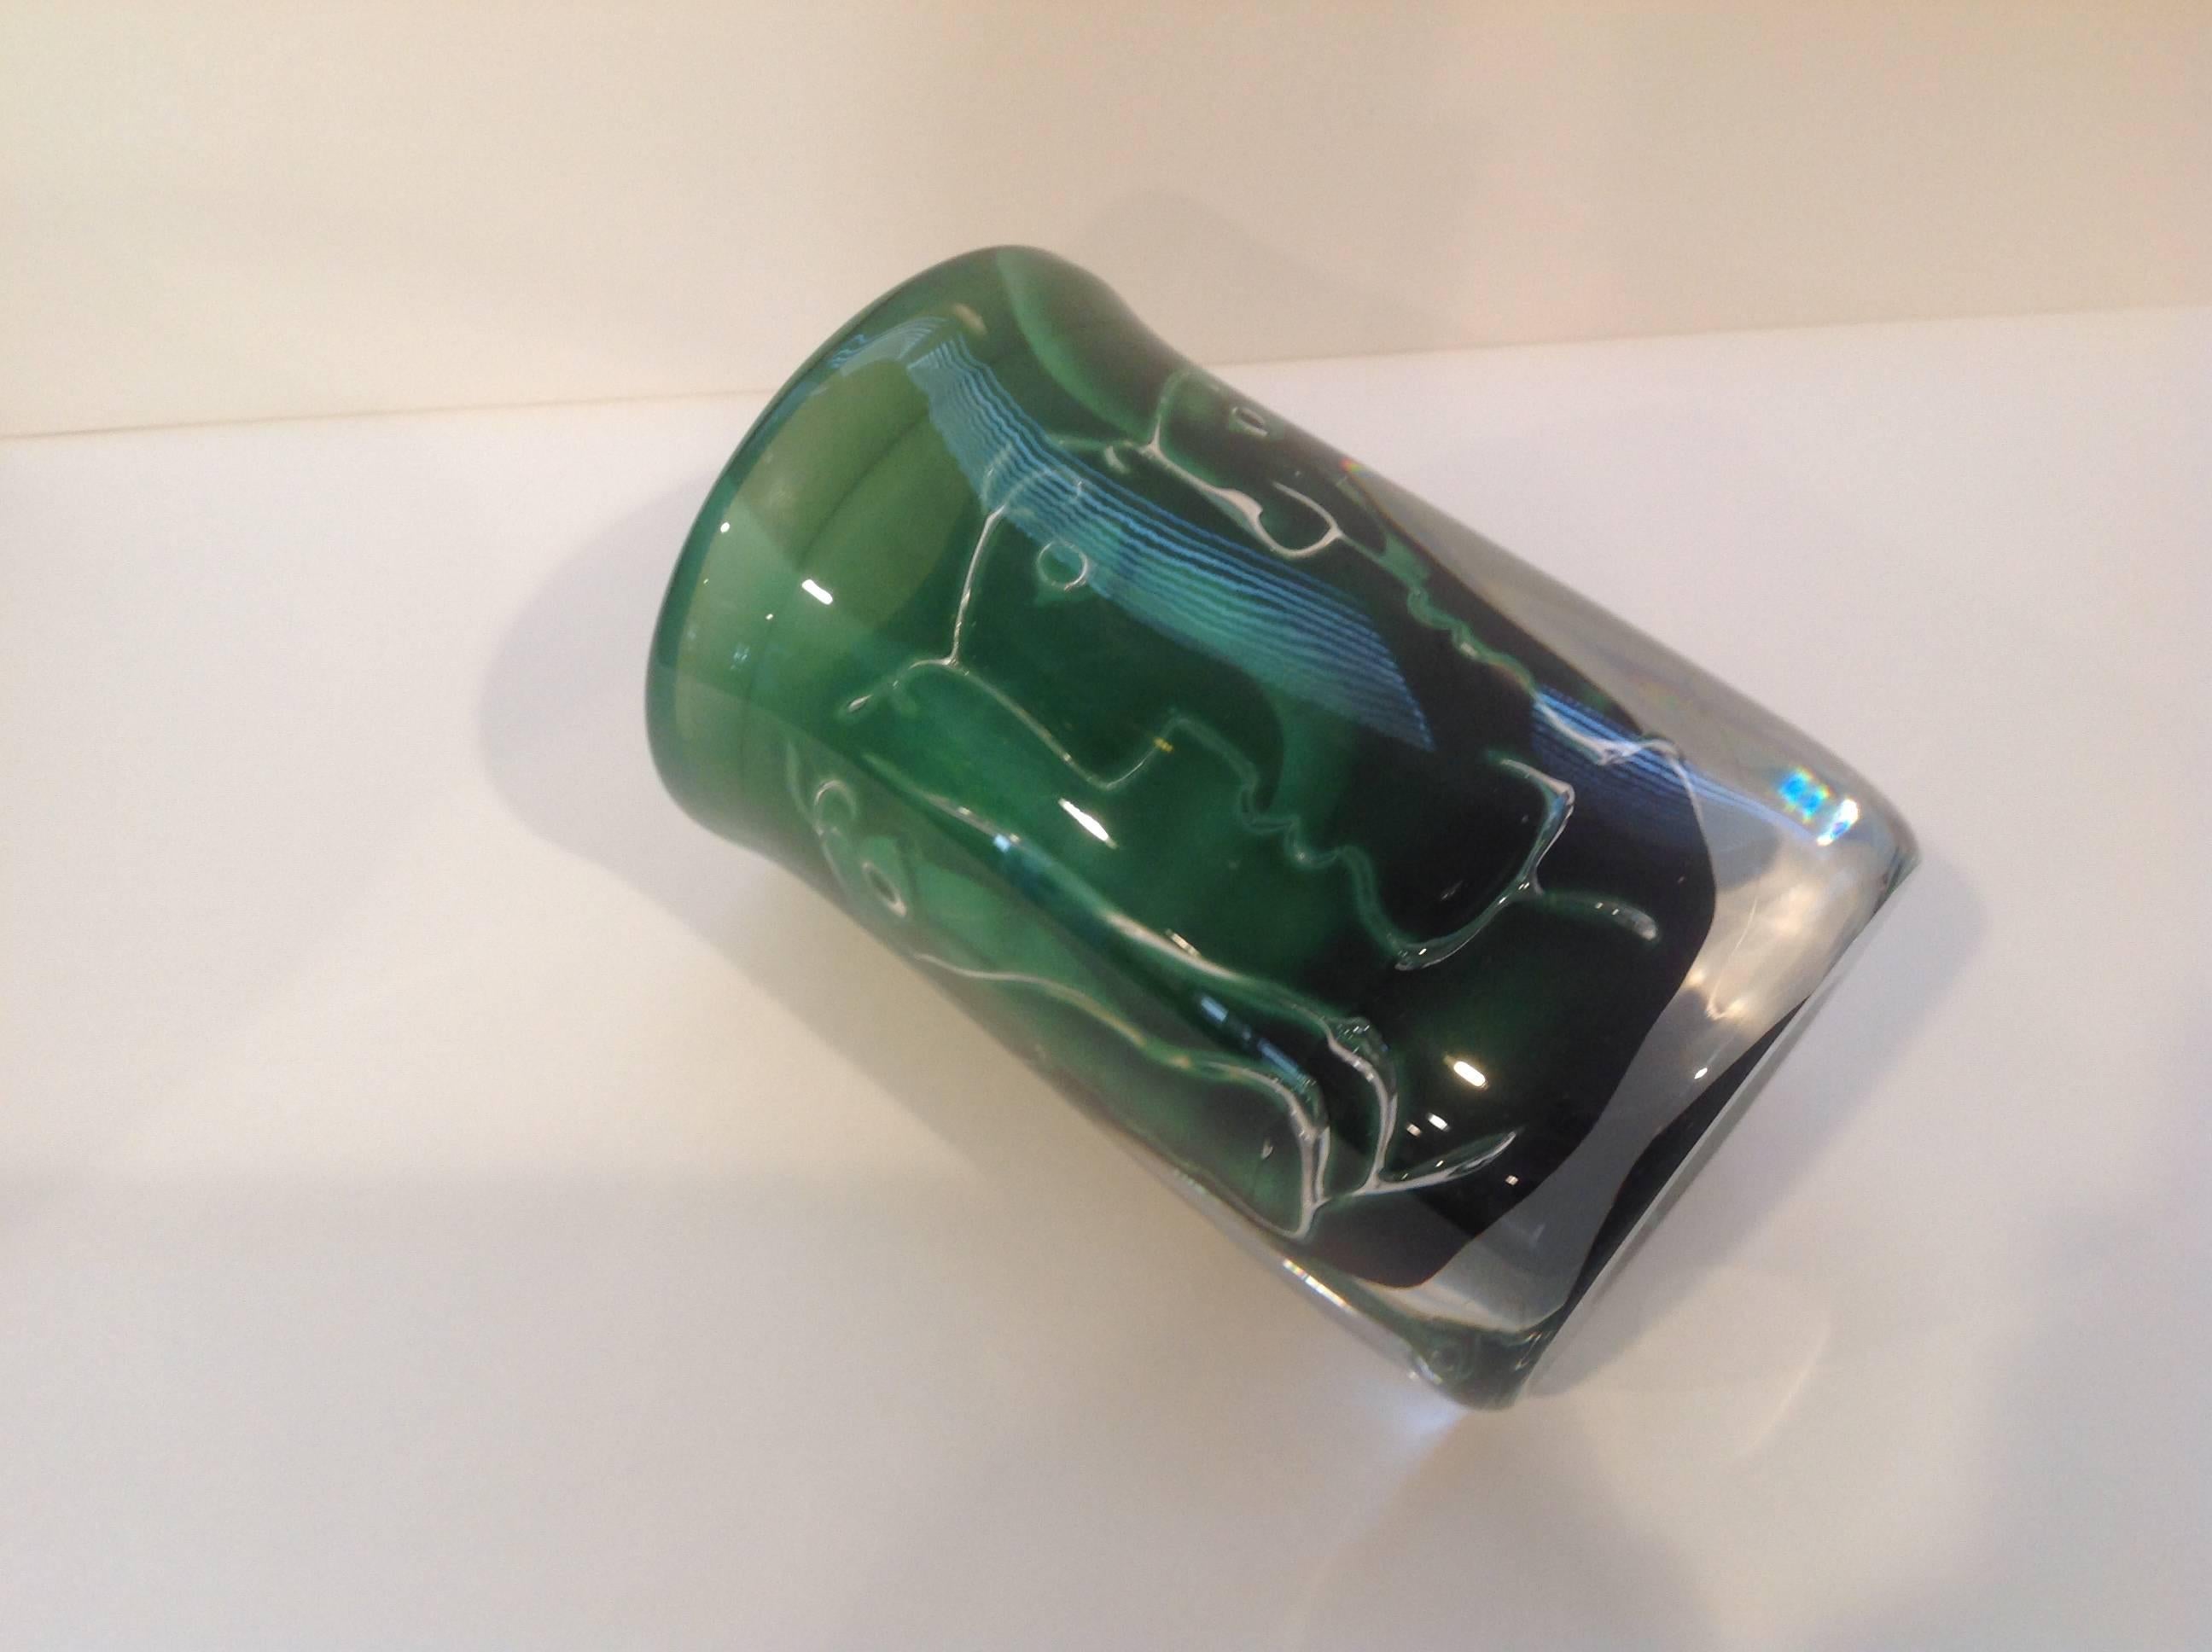 Rare 1970s Ariel vase by Ingeborg Lundin. This is an original, not from the Gallery Series.